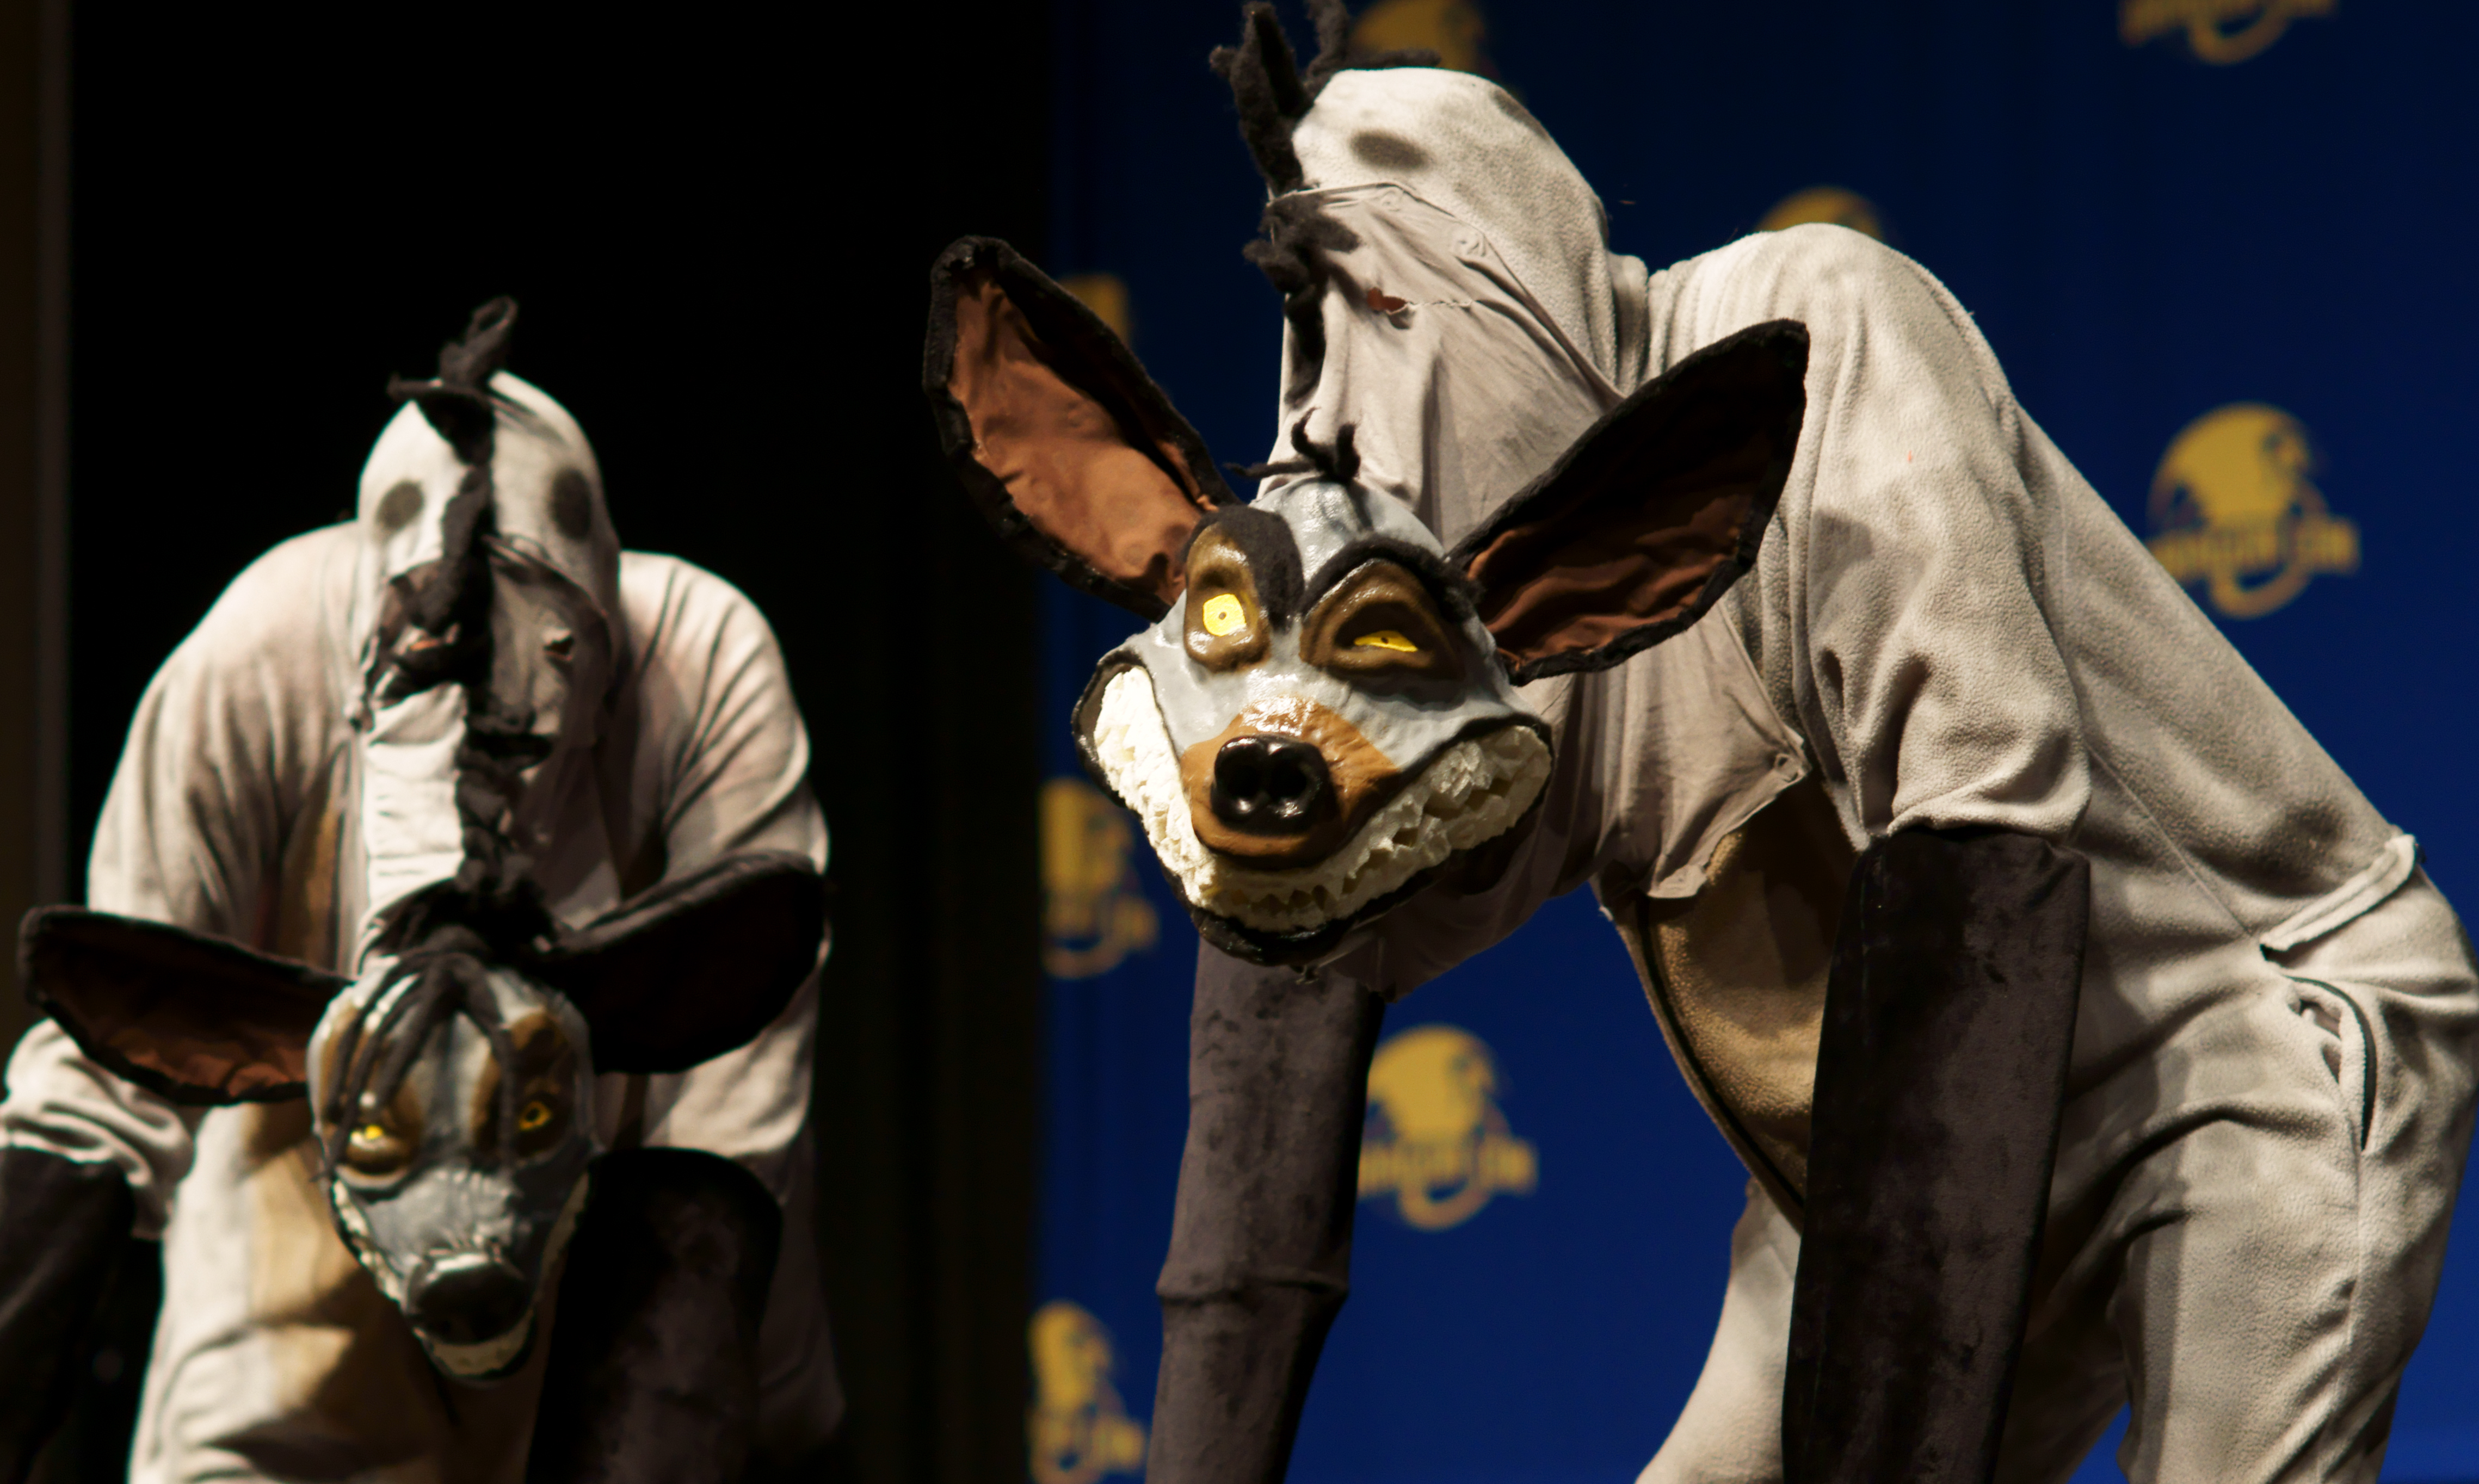 Hyenas from The Lion King Dragon Con 2015 Costume Contest. 